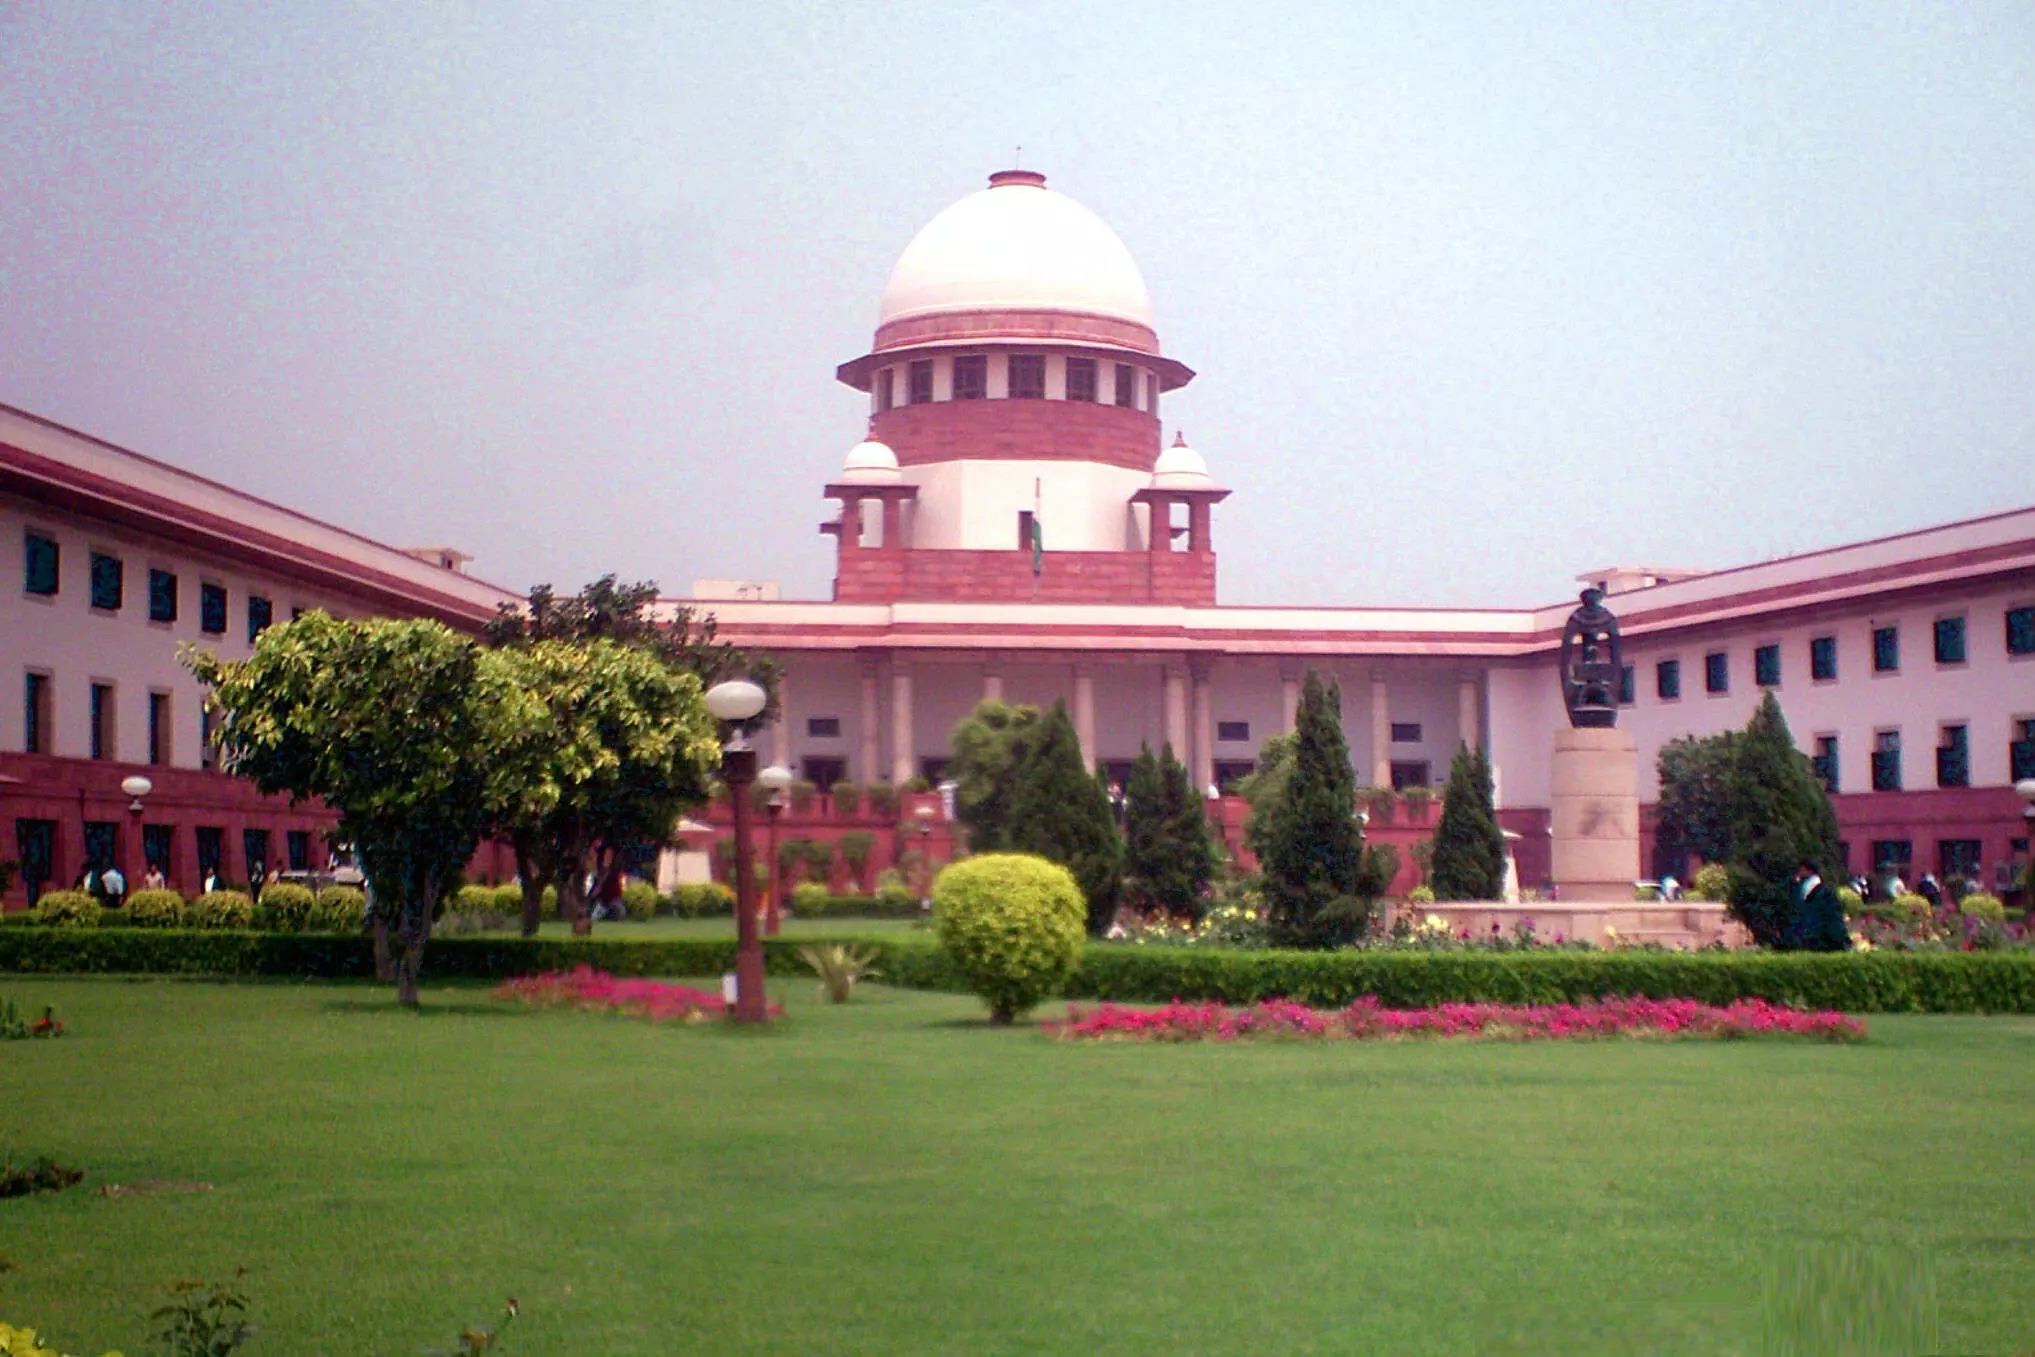 Two sides of SC verdict on reservation